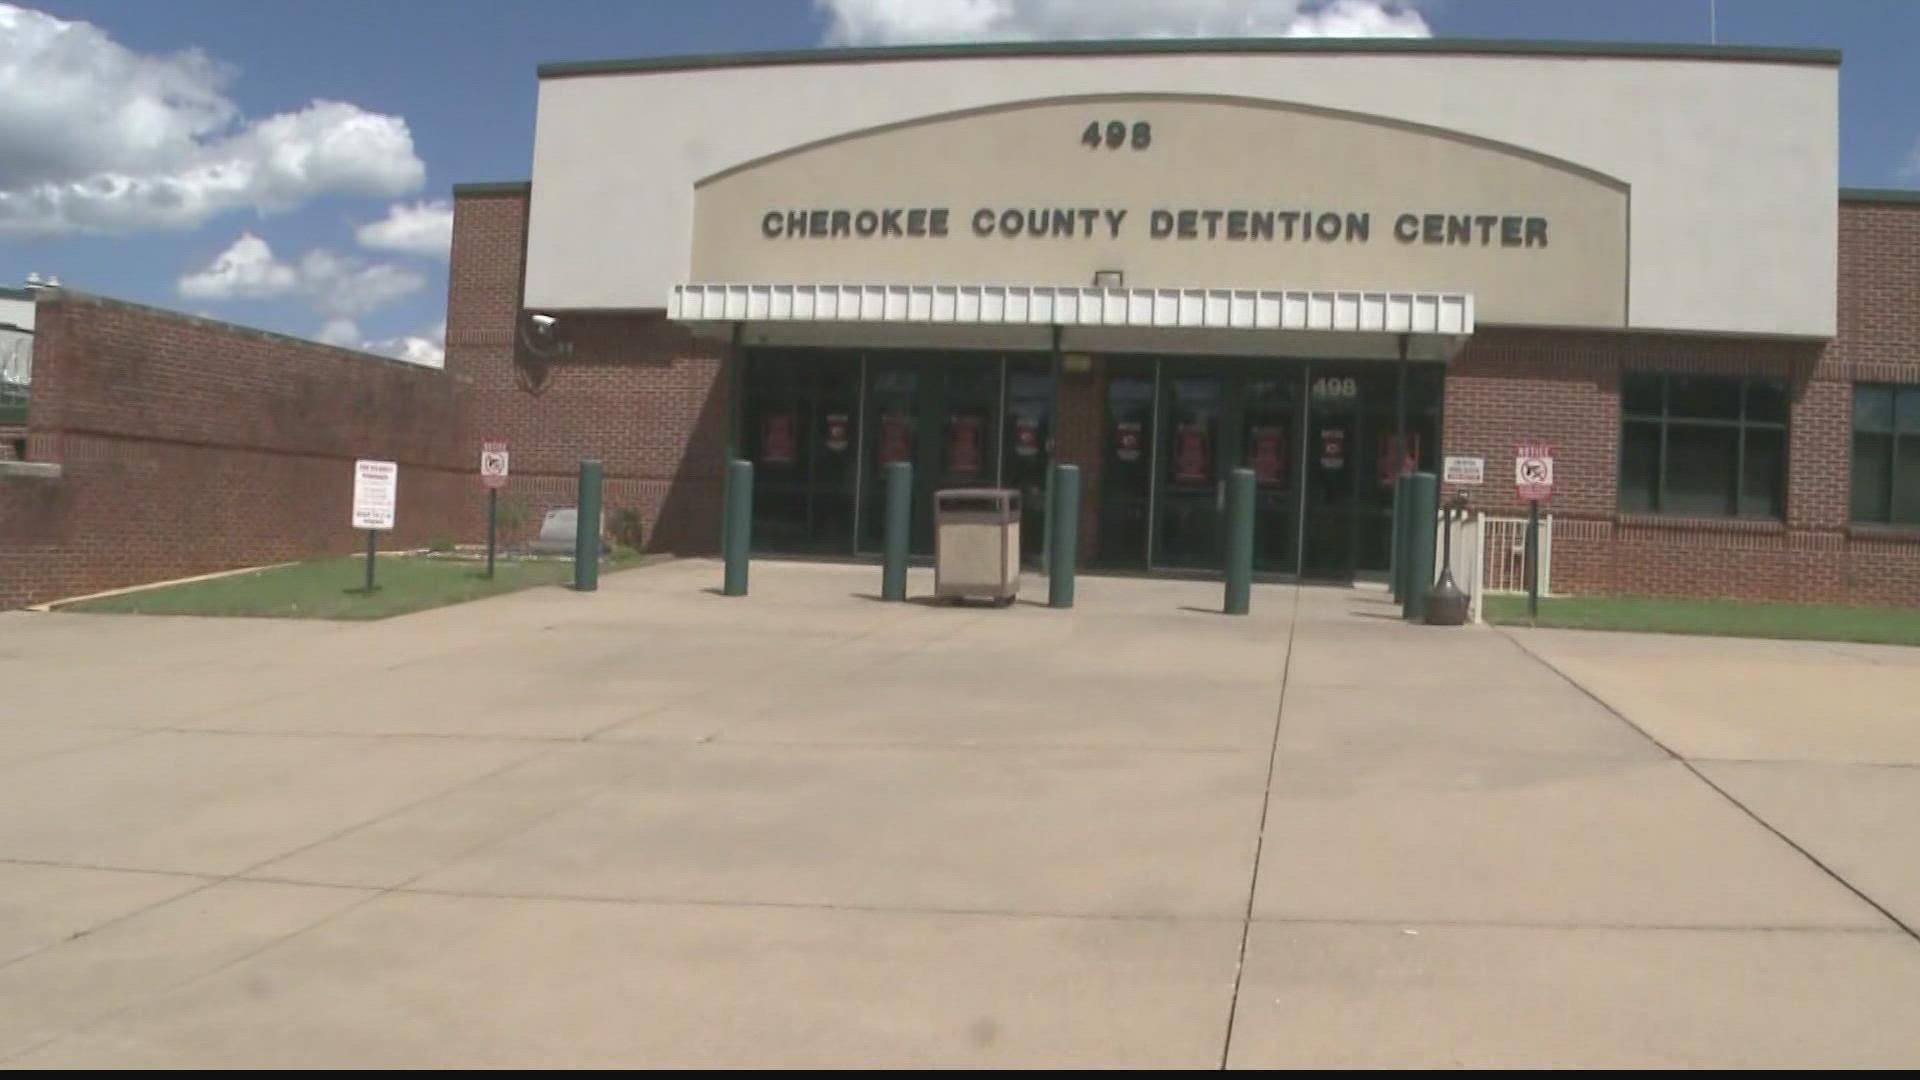 The GBI said it's going to investigate the Cherokee County Sheriff's Office and allegations that, for years, deputies have been sexually assaulting jail inmates.